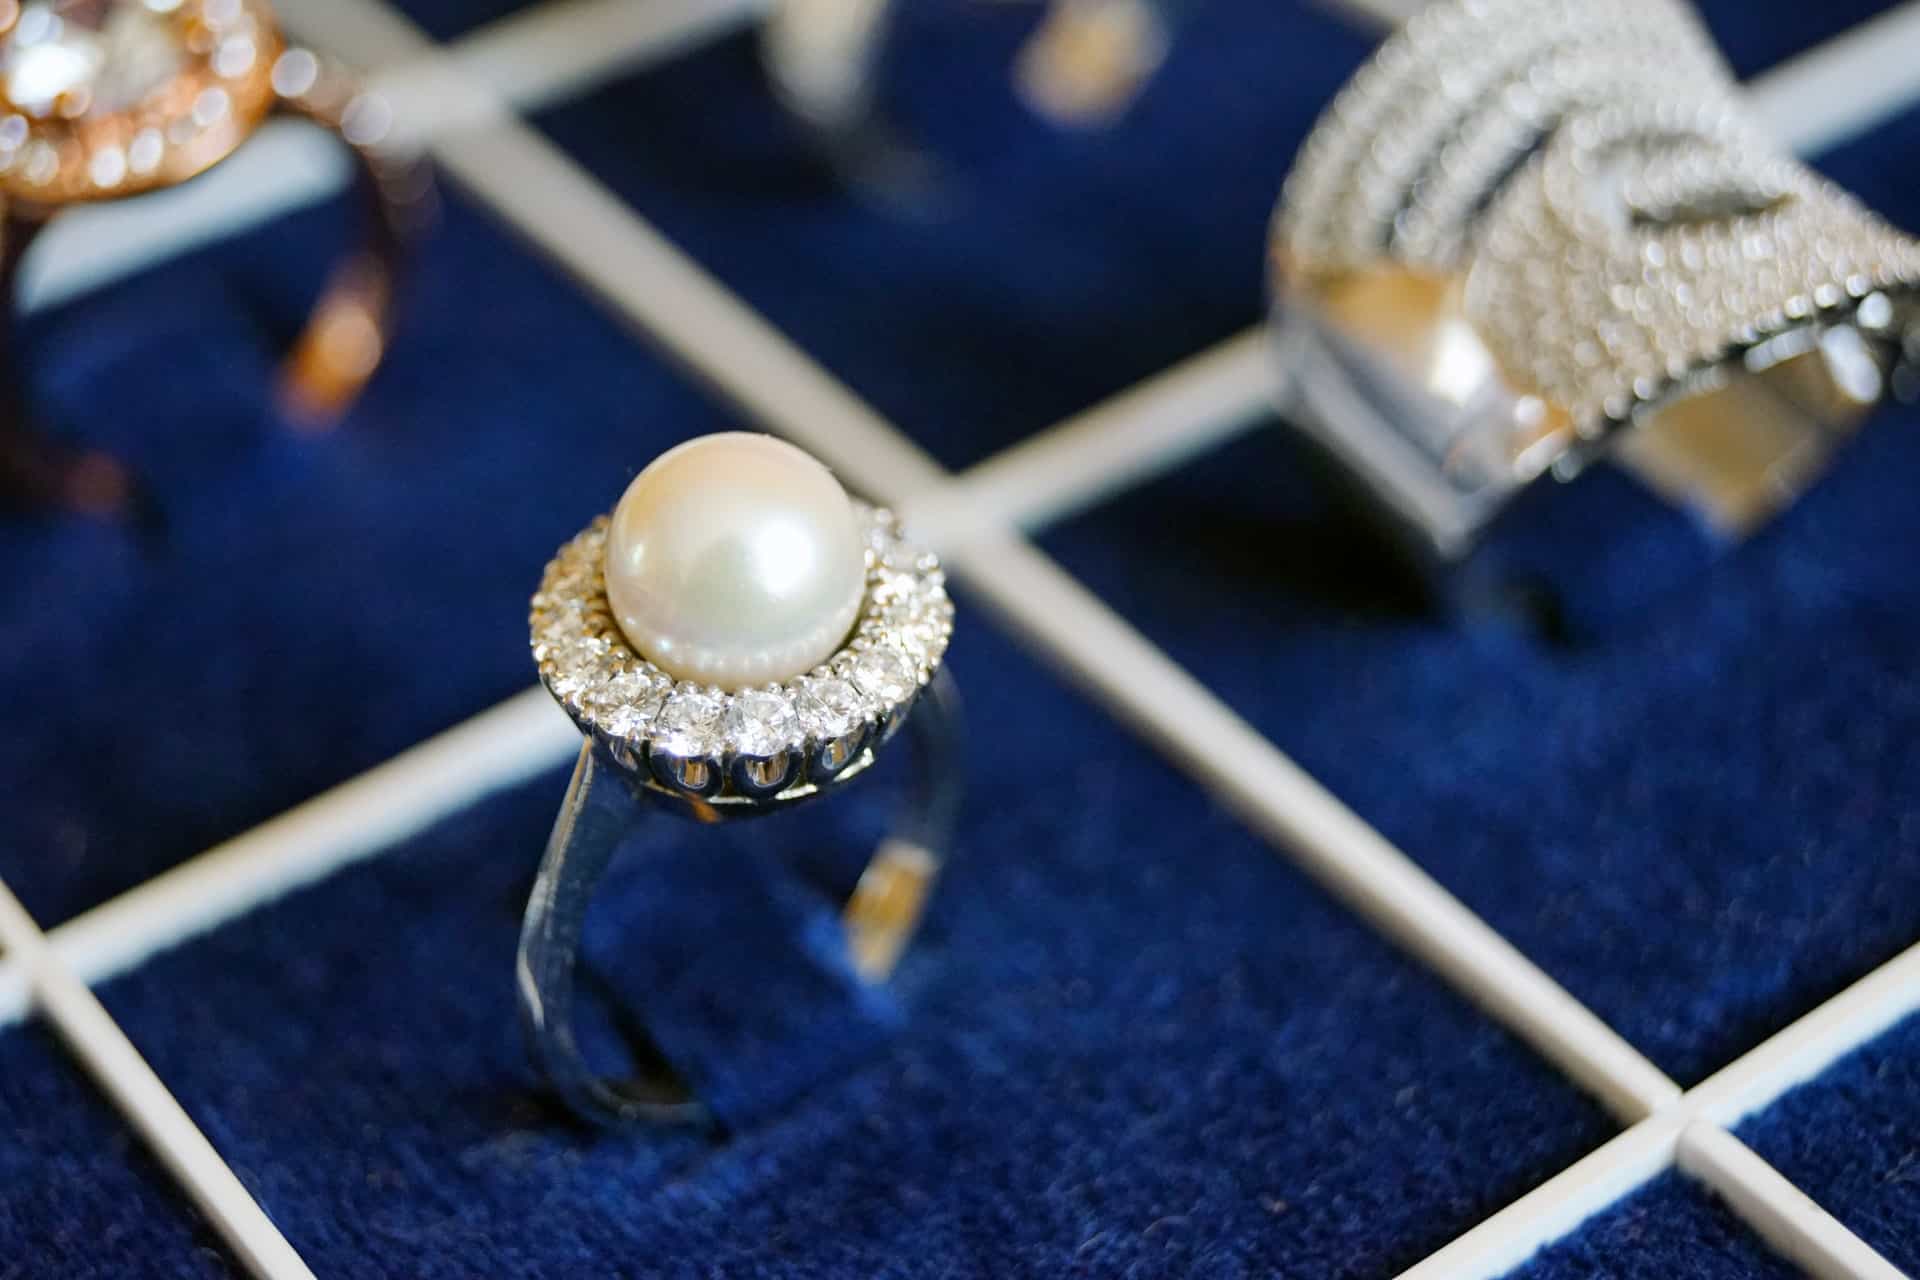 pearls can be used in a variety of settings, even rings